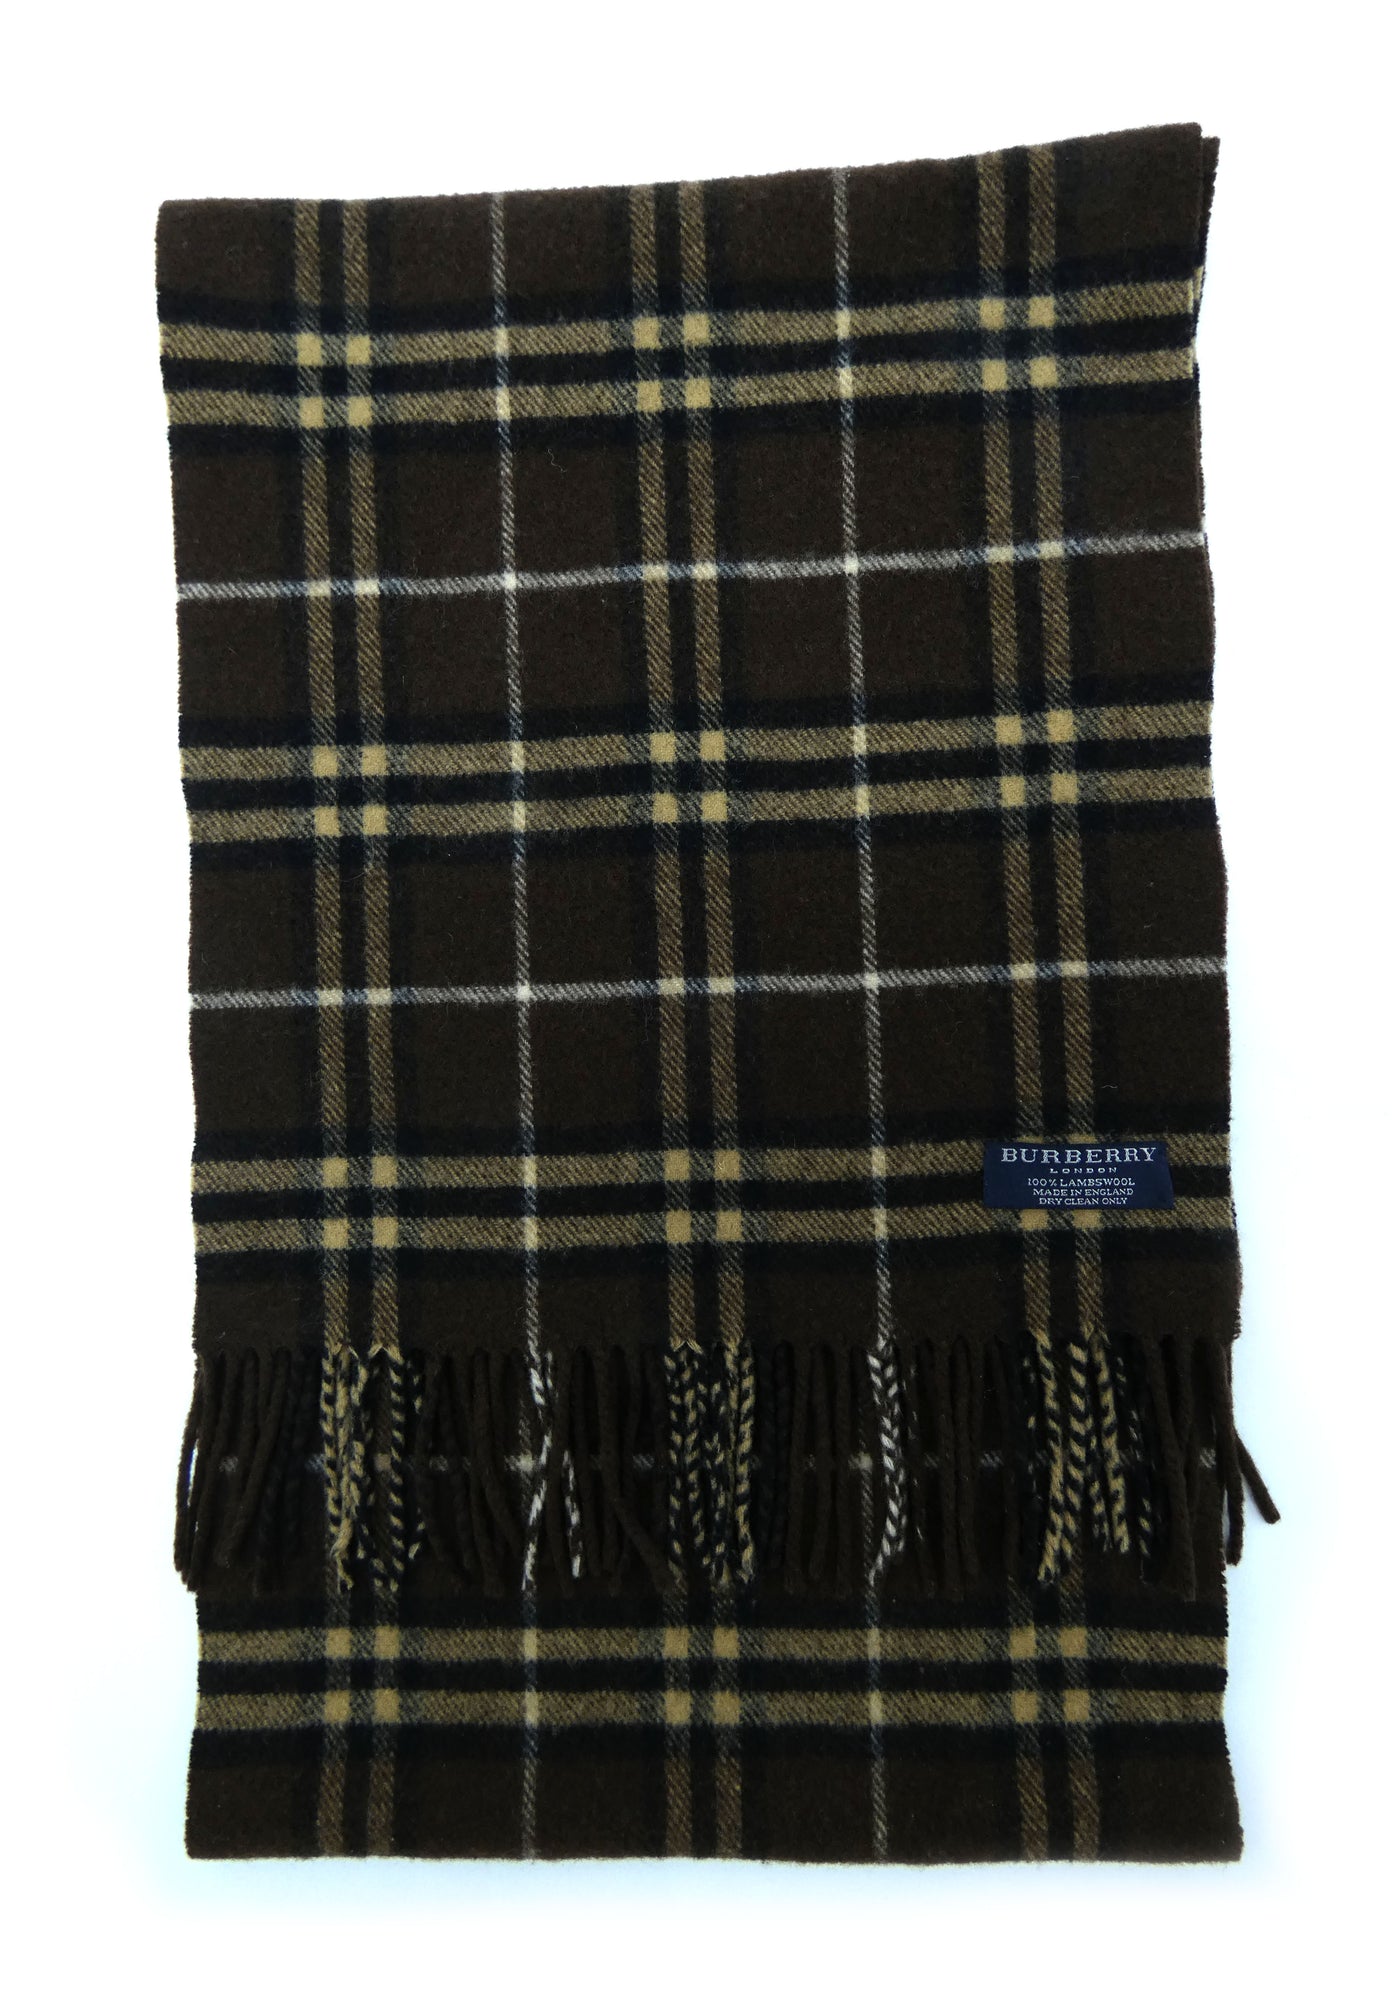 Burberry Lambswool House Check Brown Scarf Scarf Burberry